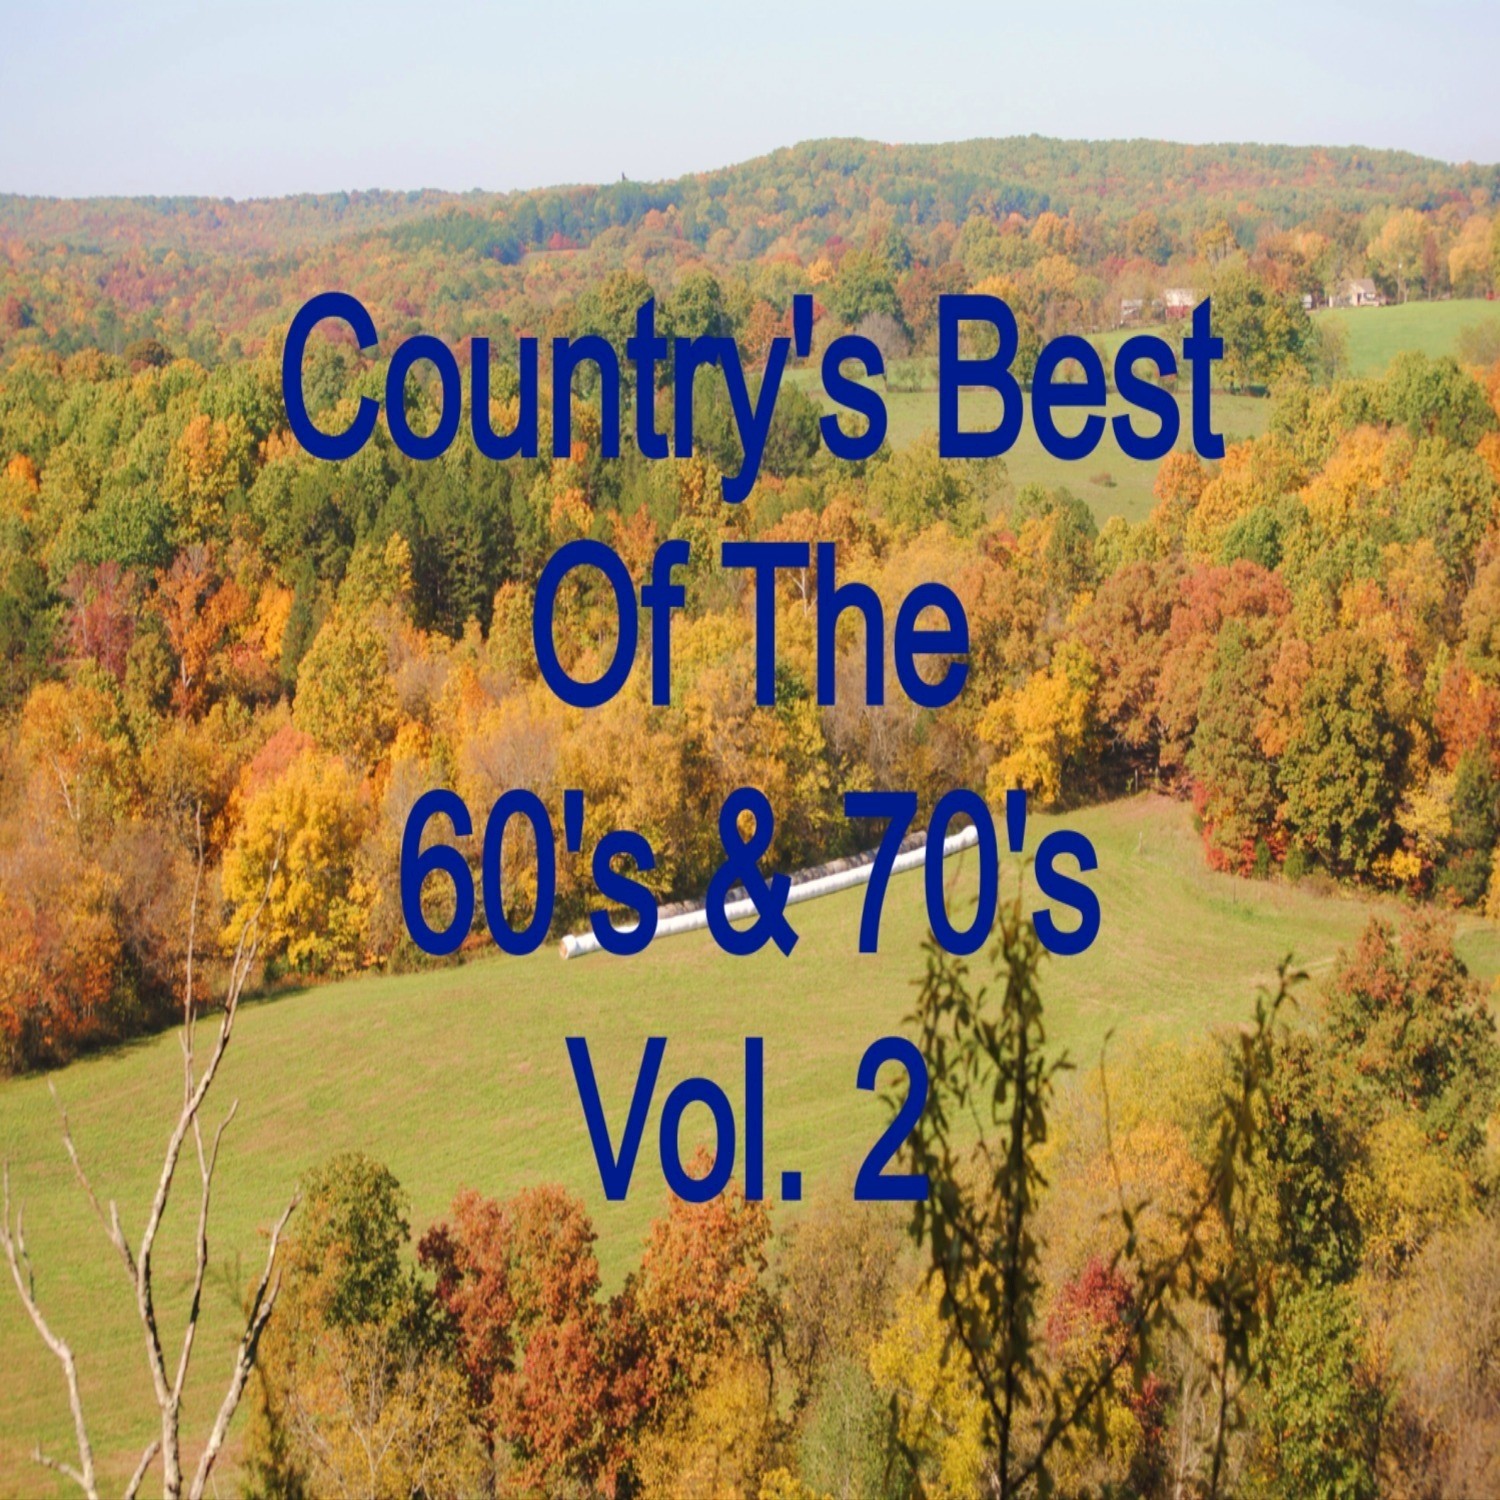 Country's Best of the 60's & 70's Vol. 2